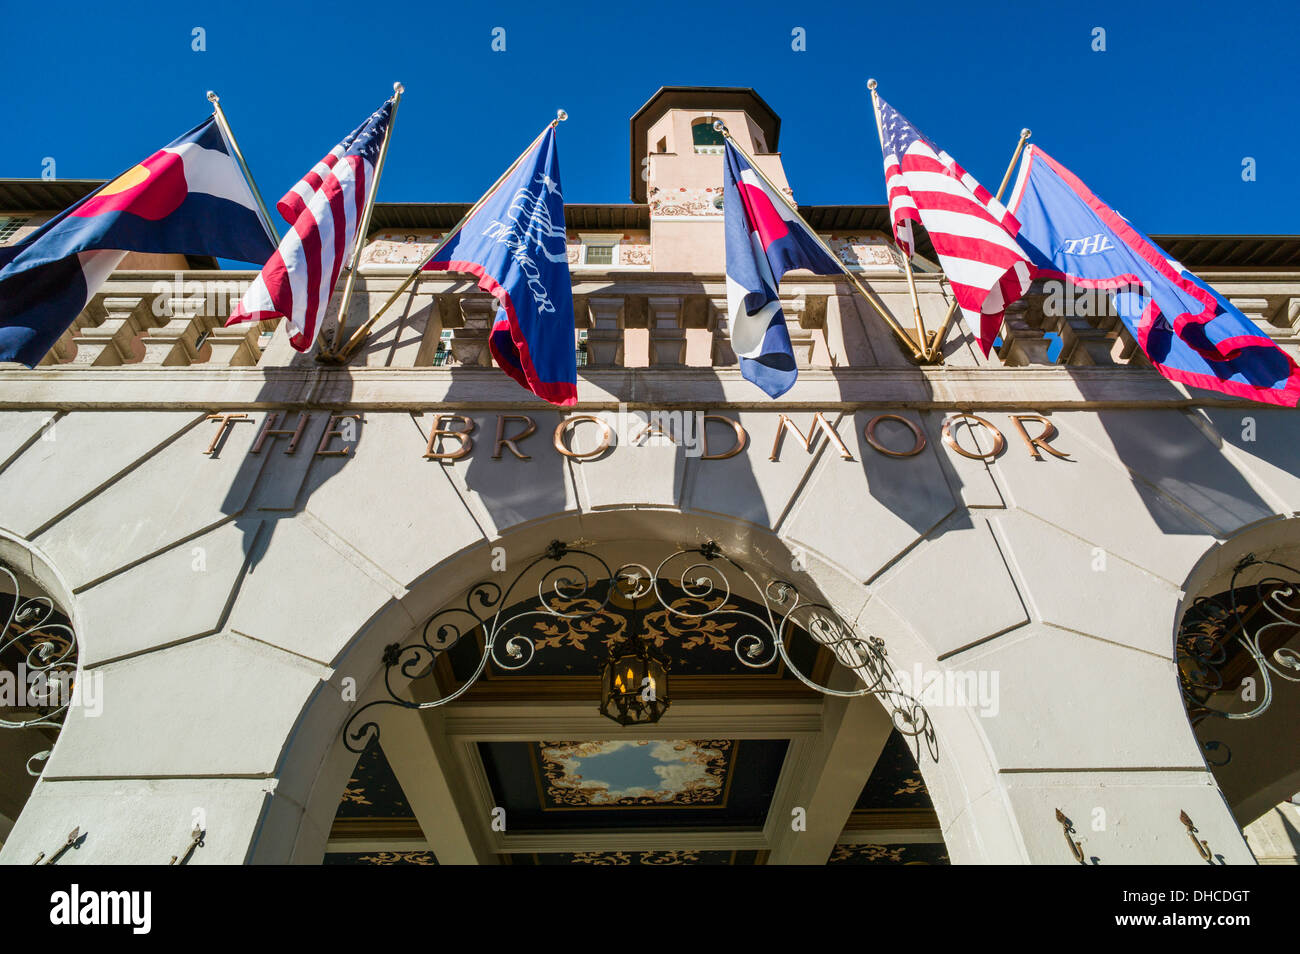 Colorful flags hang at The Broadmoor, historic luxury hotel and resort, Colorado Springs, Colorado, USA Stock Photo